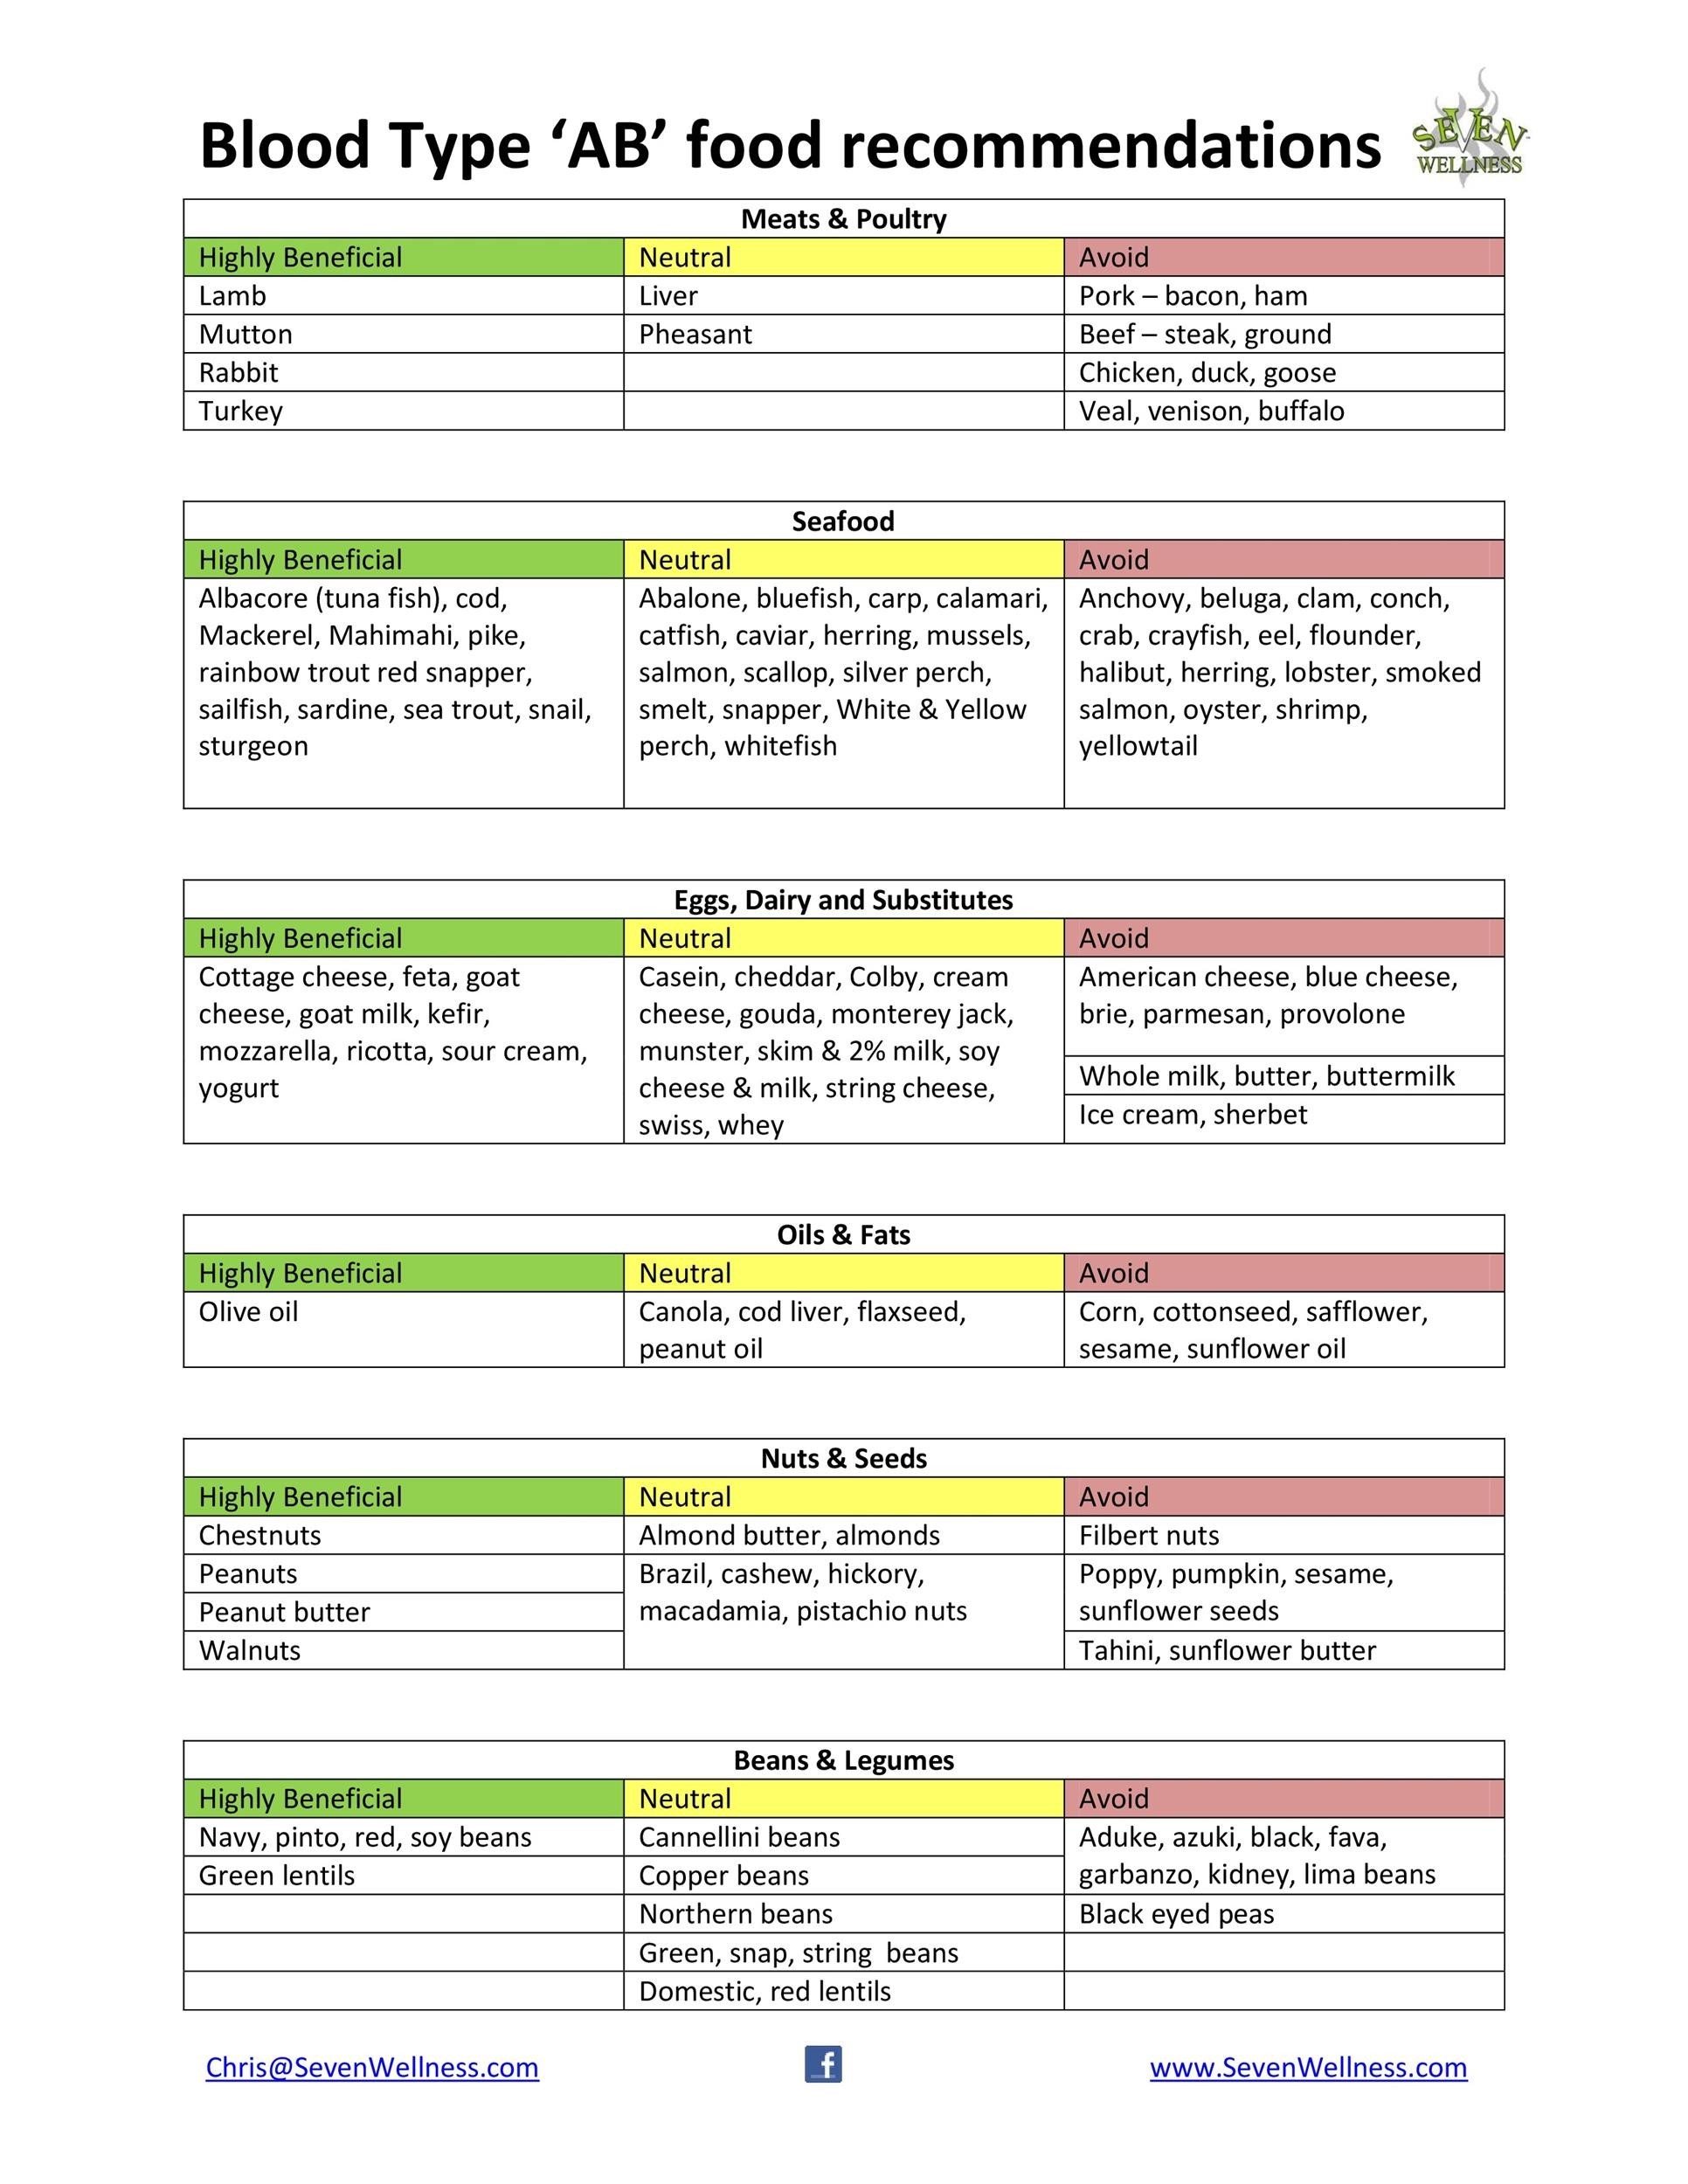 Blood Group Based Diet Chart